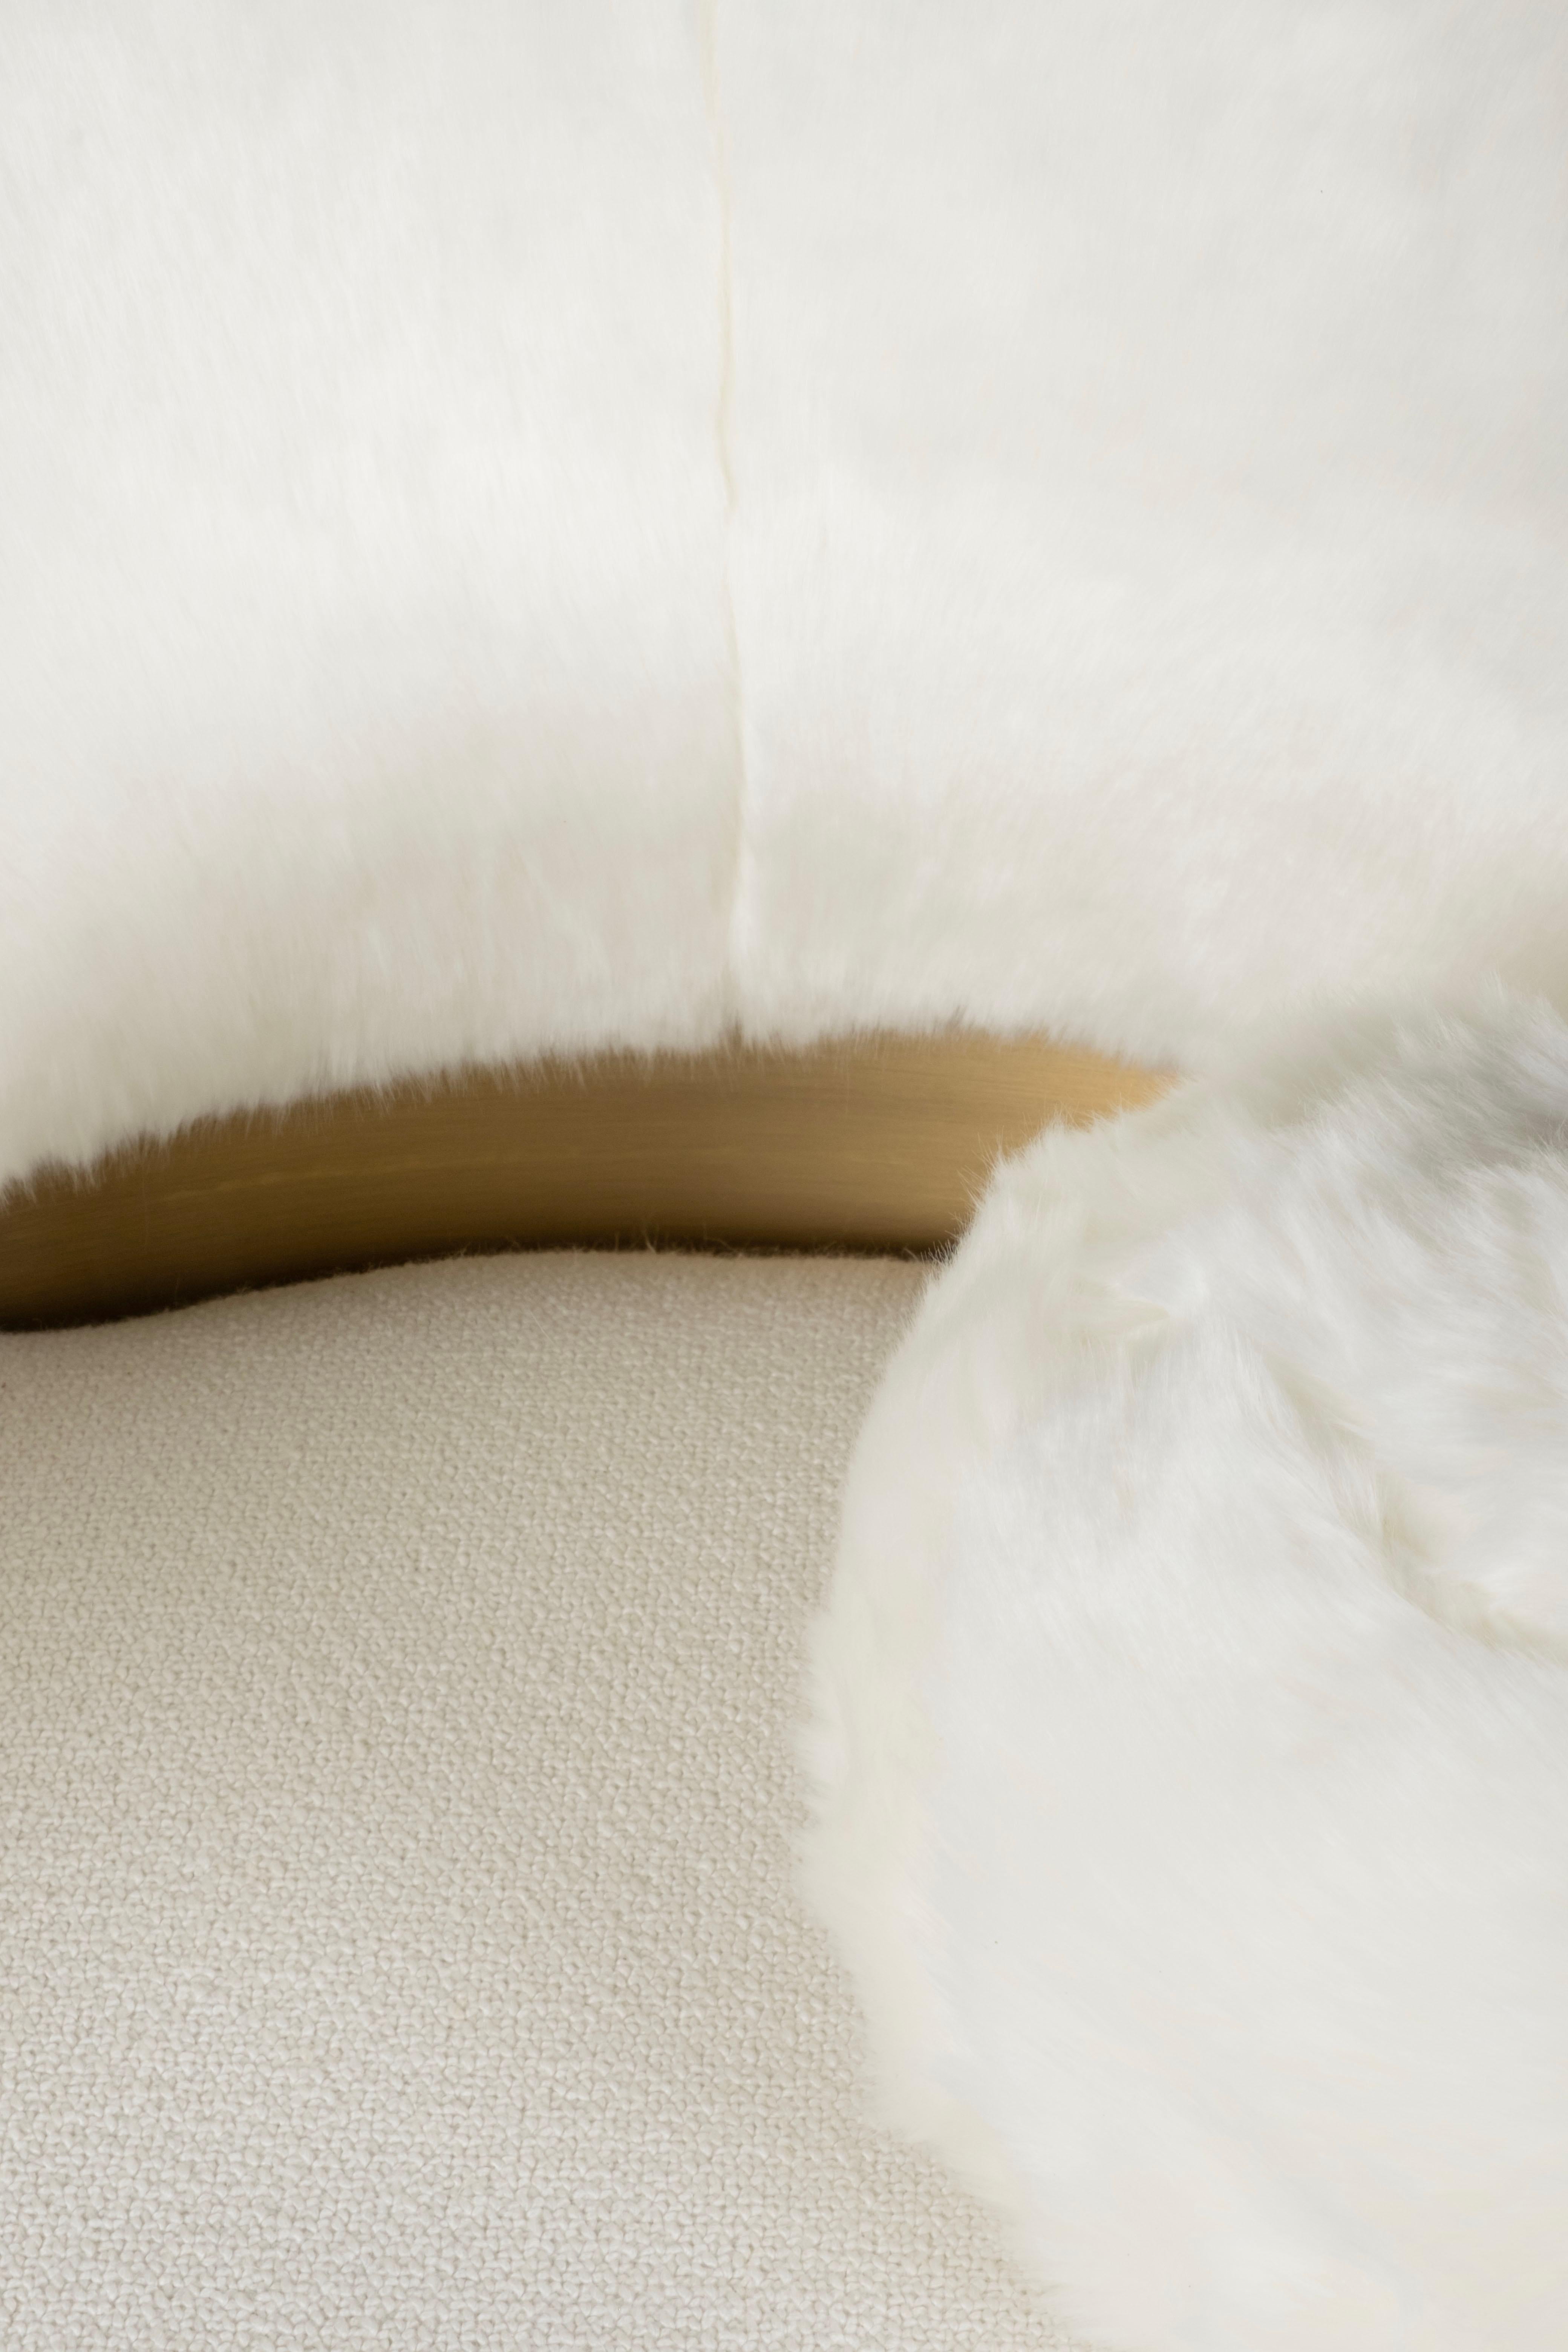 Modern Caju Lounge Chair, Swivel, White Faux Fur, Handmade Portugal Greenapple In New Condition For Sale In Lisboa, PT